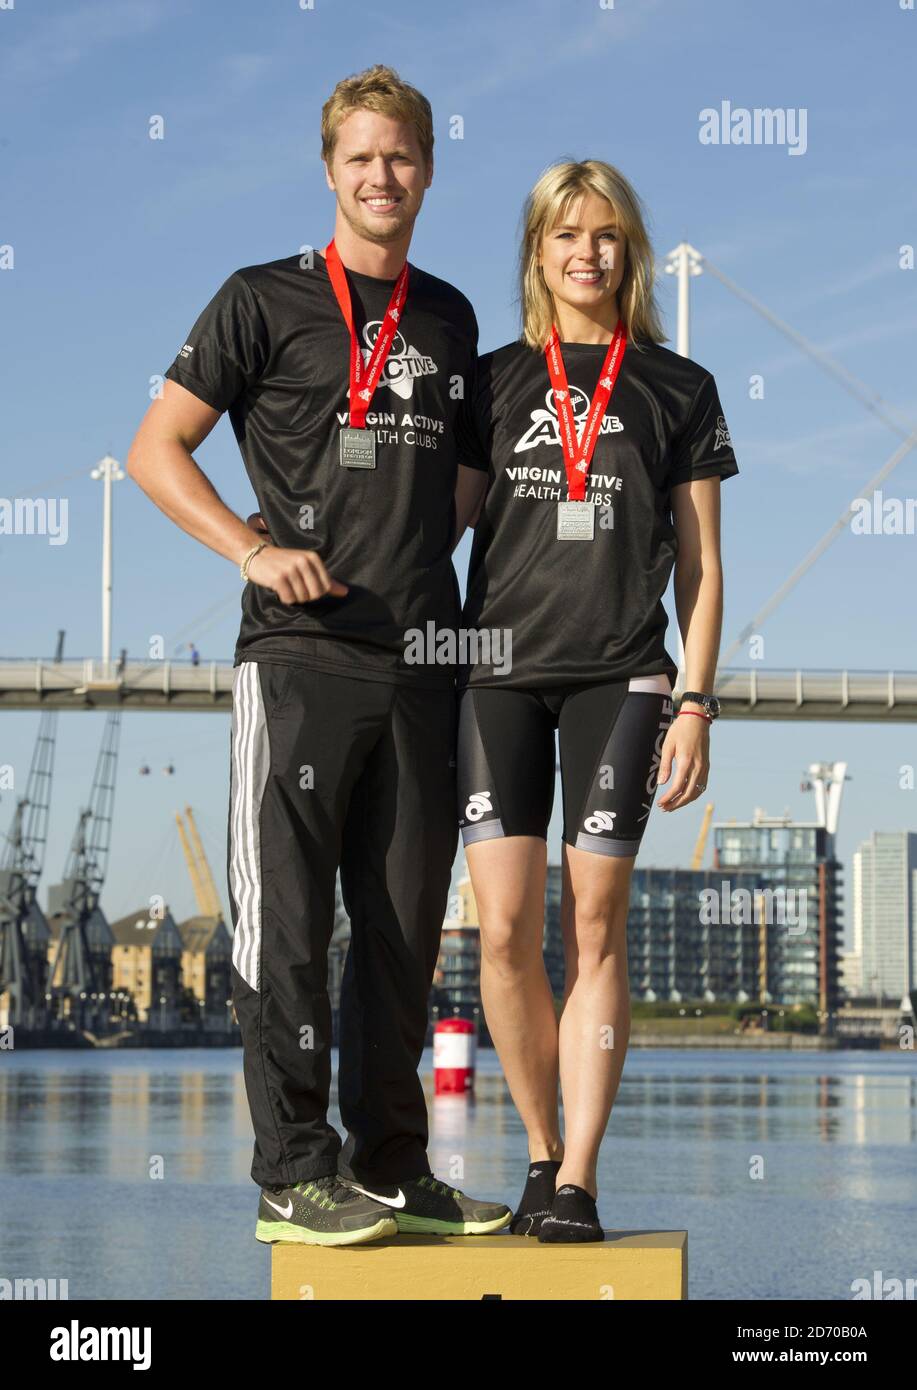 Sam Branson and girlfriend Isabella Calthorpe at the Virgin Active London Triathlon, which encouraged people to 'Be Your Personal Best', at the Excel Centre in east London. Stock Photo